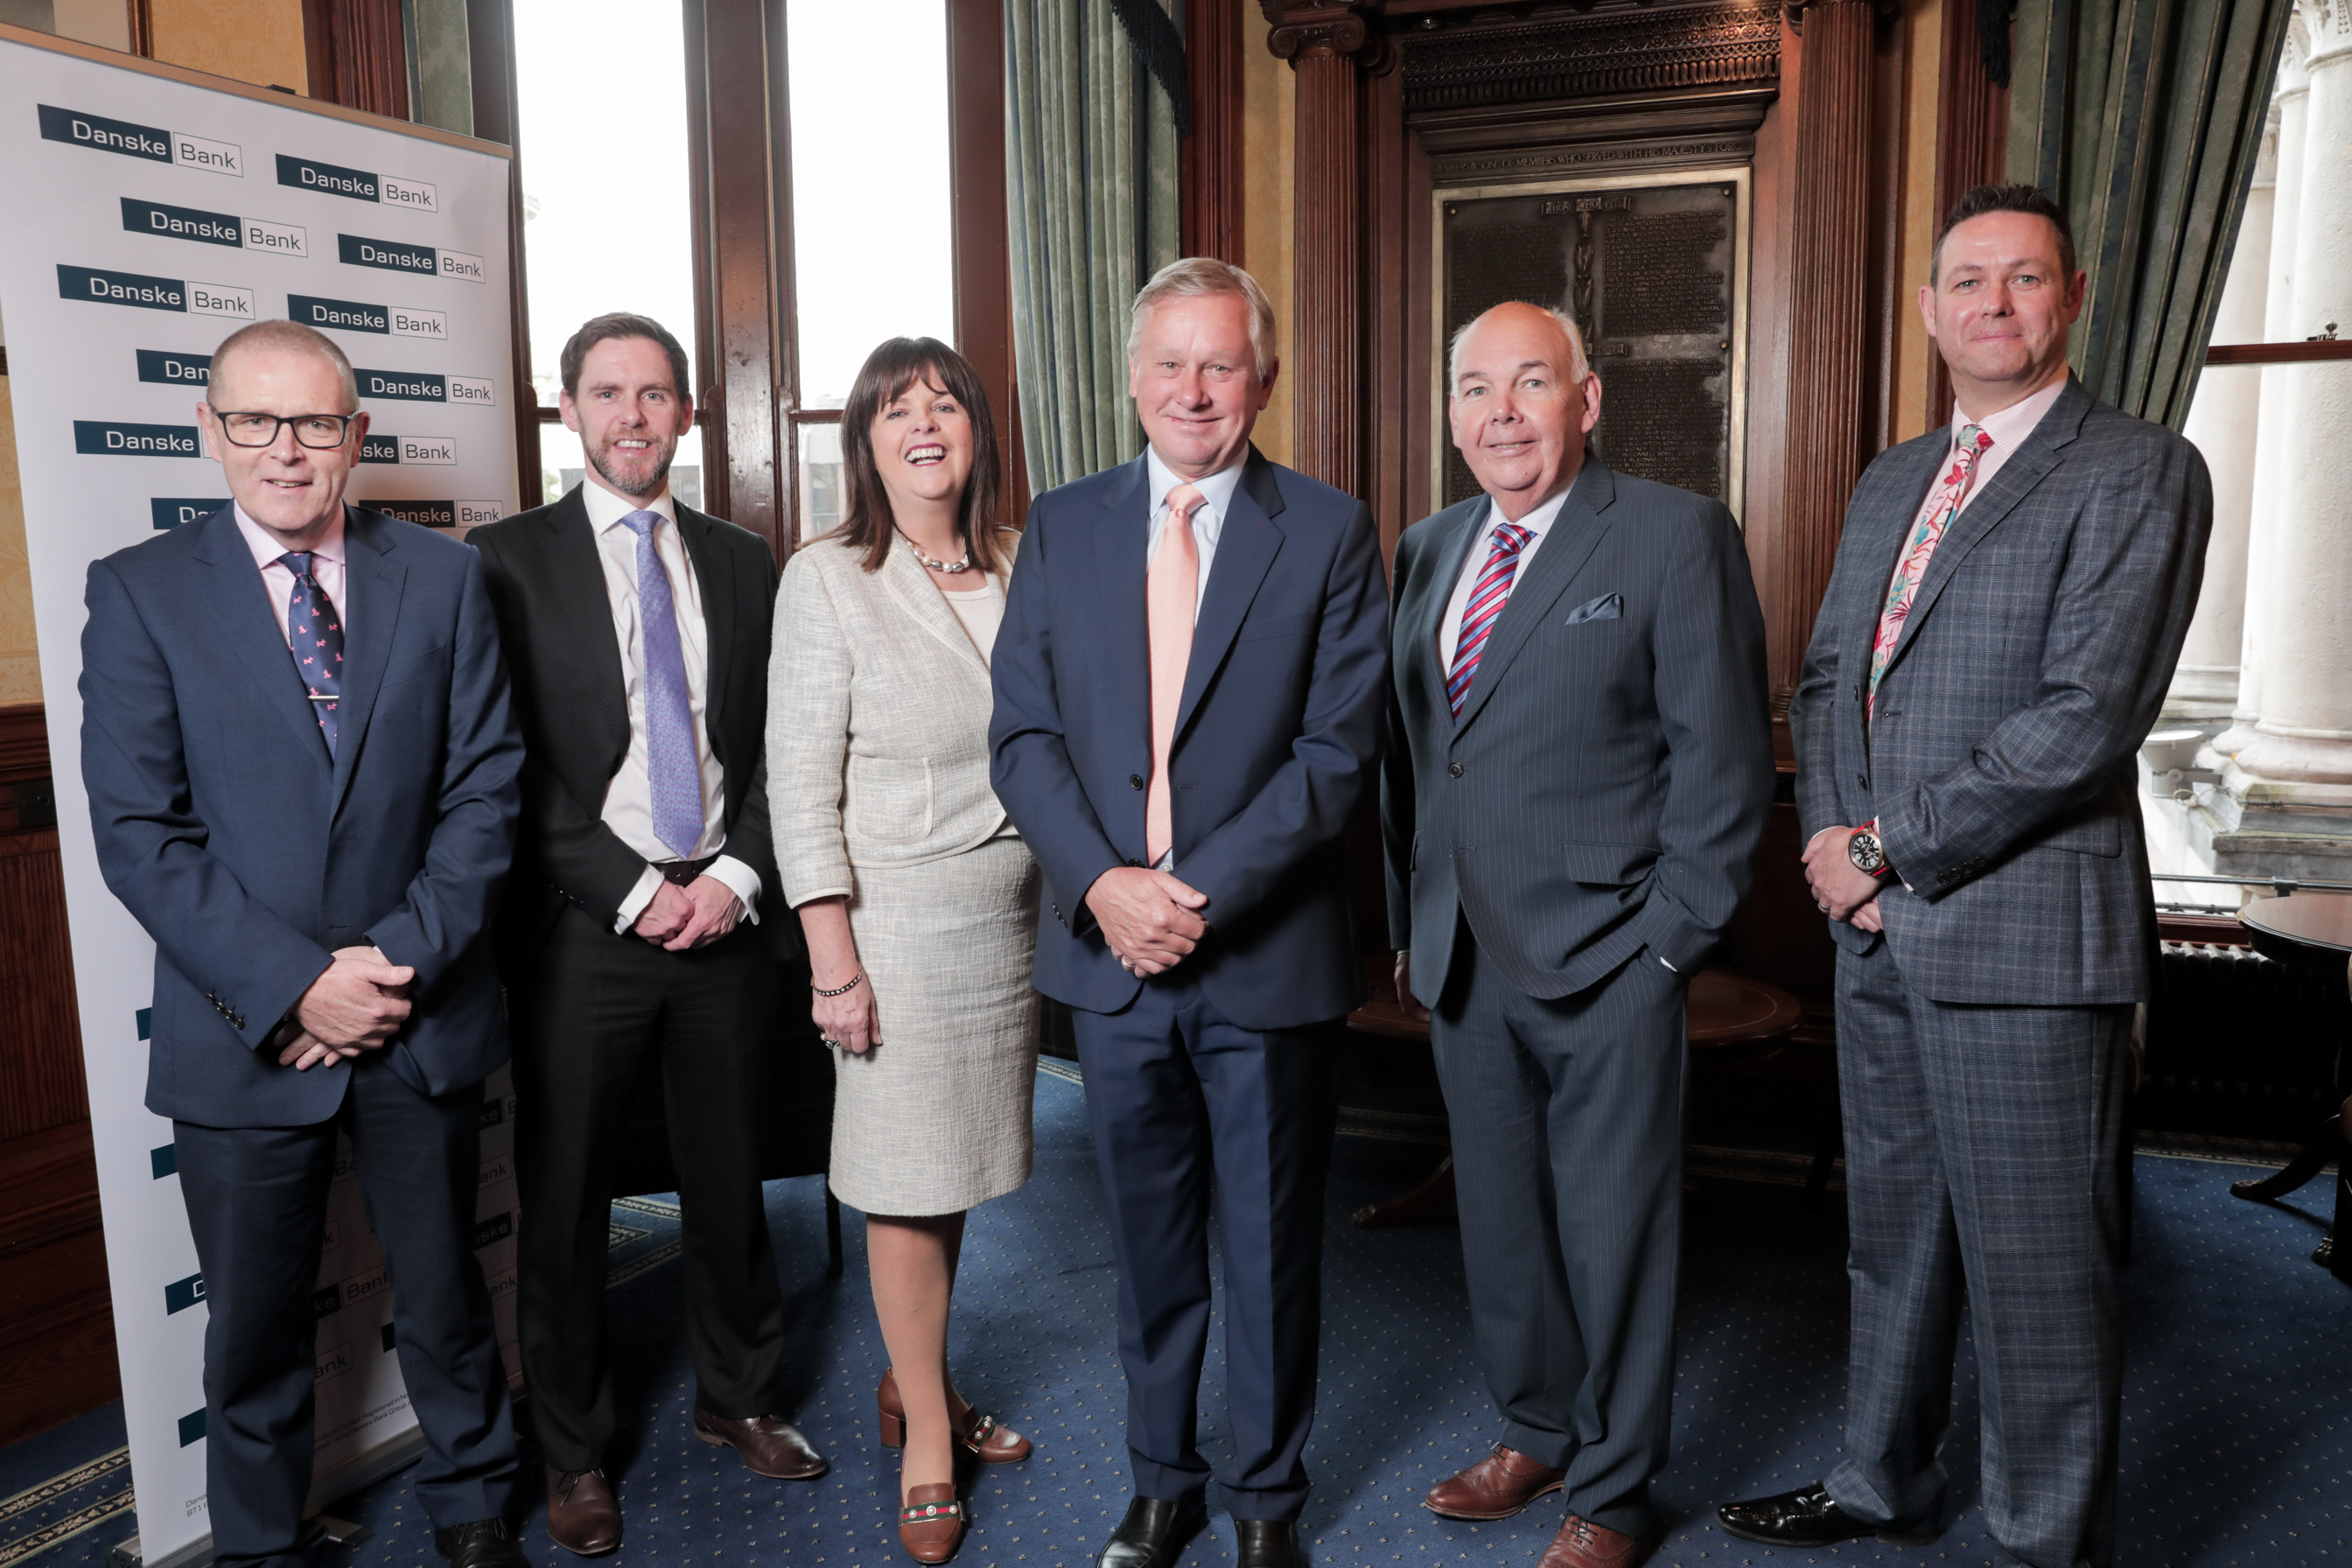 Six people, smartly dressed, stand beside each other looking into the camera and smiling. Behind them to the left is a Danske Bank branded pull up banner.